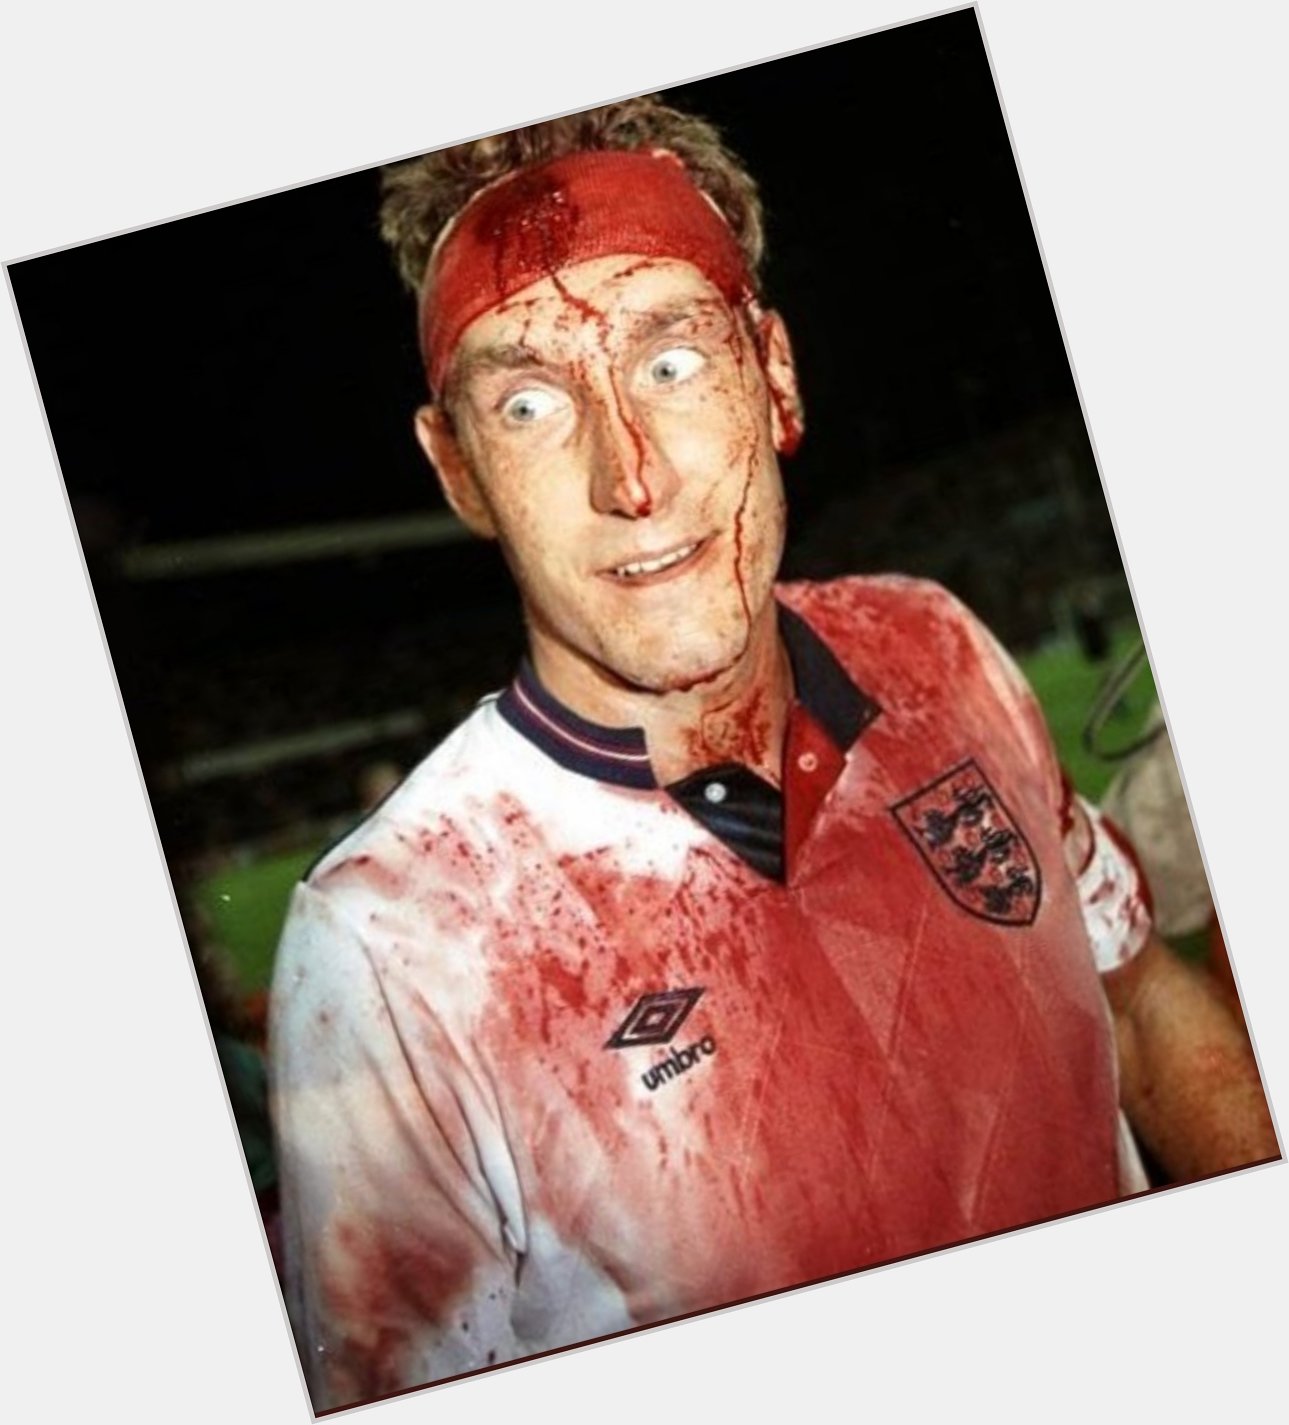 ... you should see the other guy!

Happy Birthday Terry Butcher 